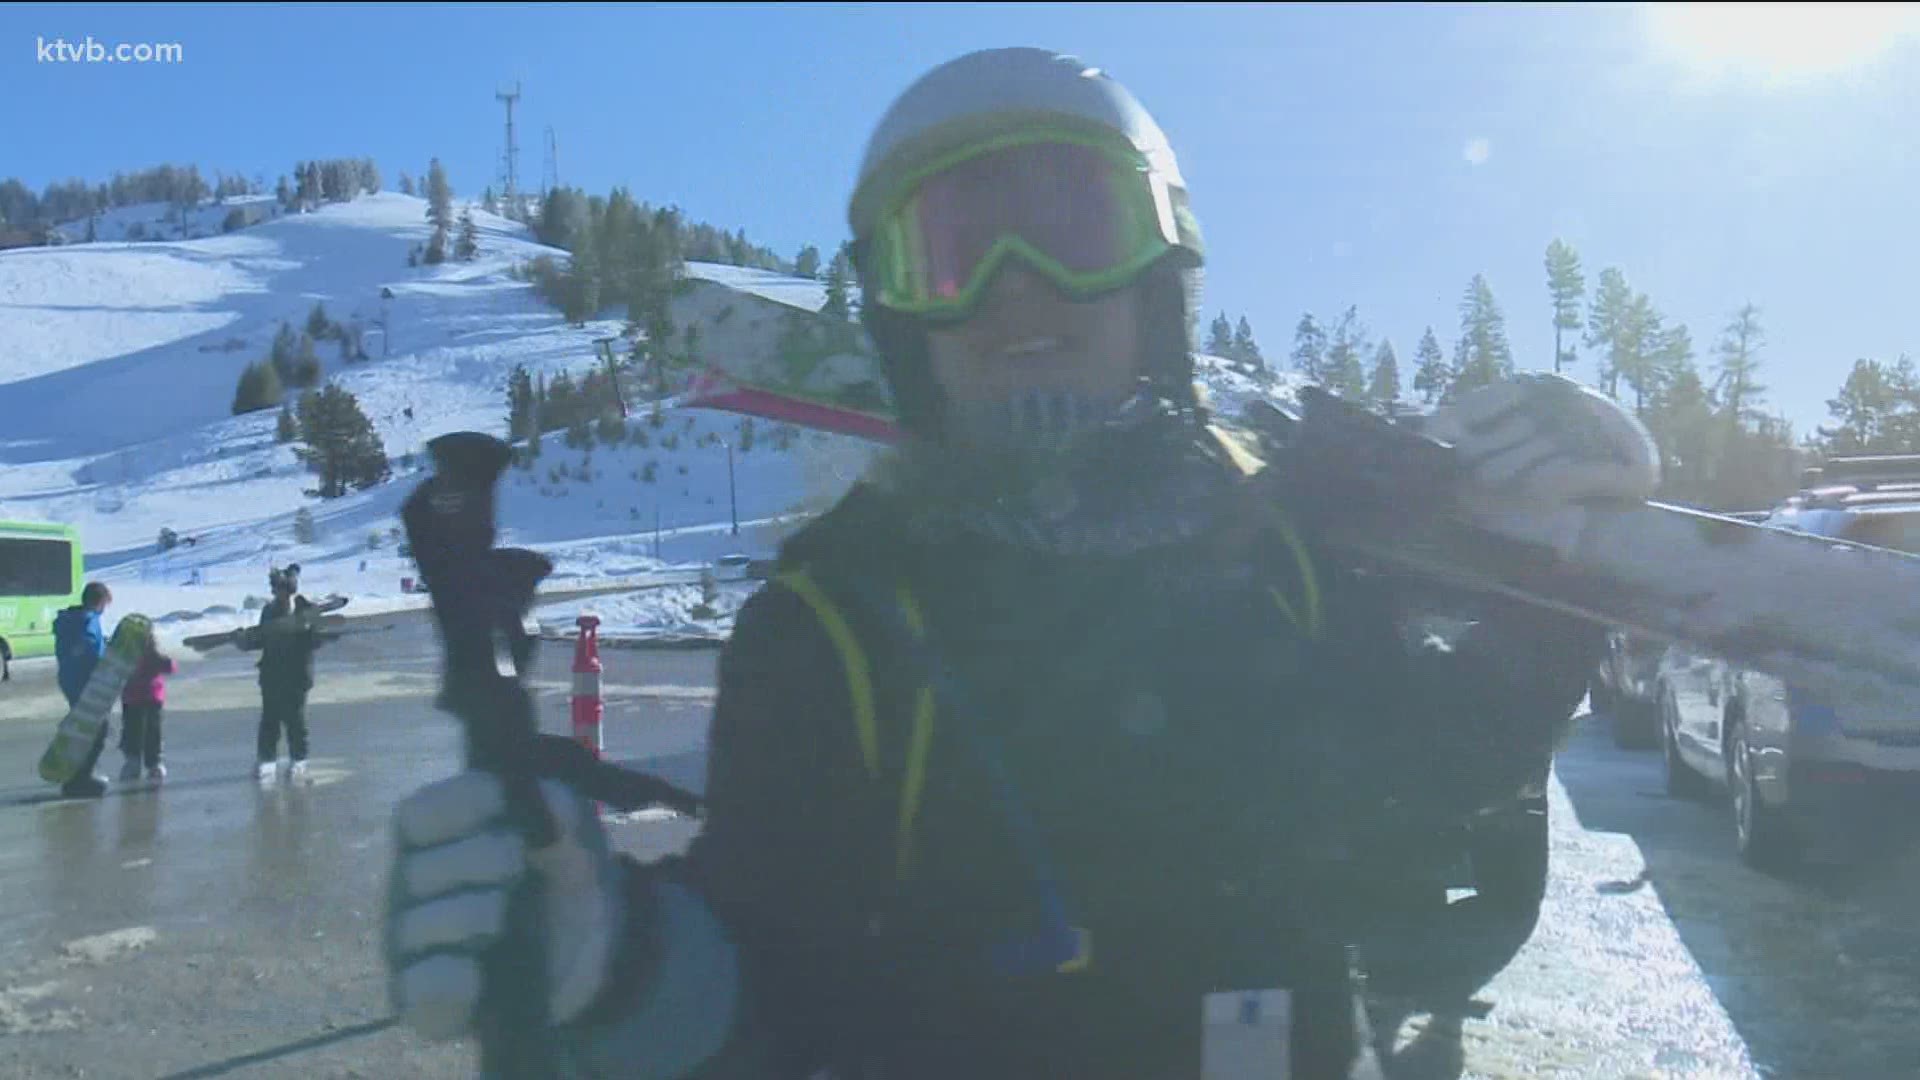 Southwest Idaho ski areas report having a very good year, despite the coronavirus concerns that had them making some difficult changes and crossing their fingers.